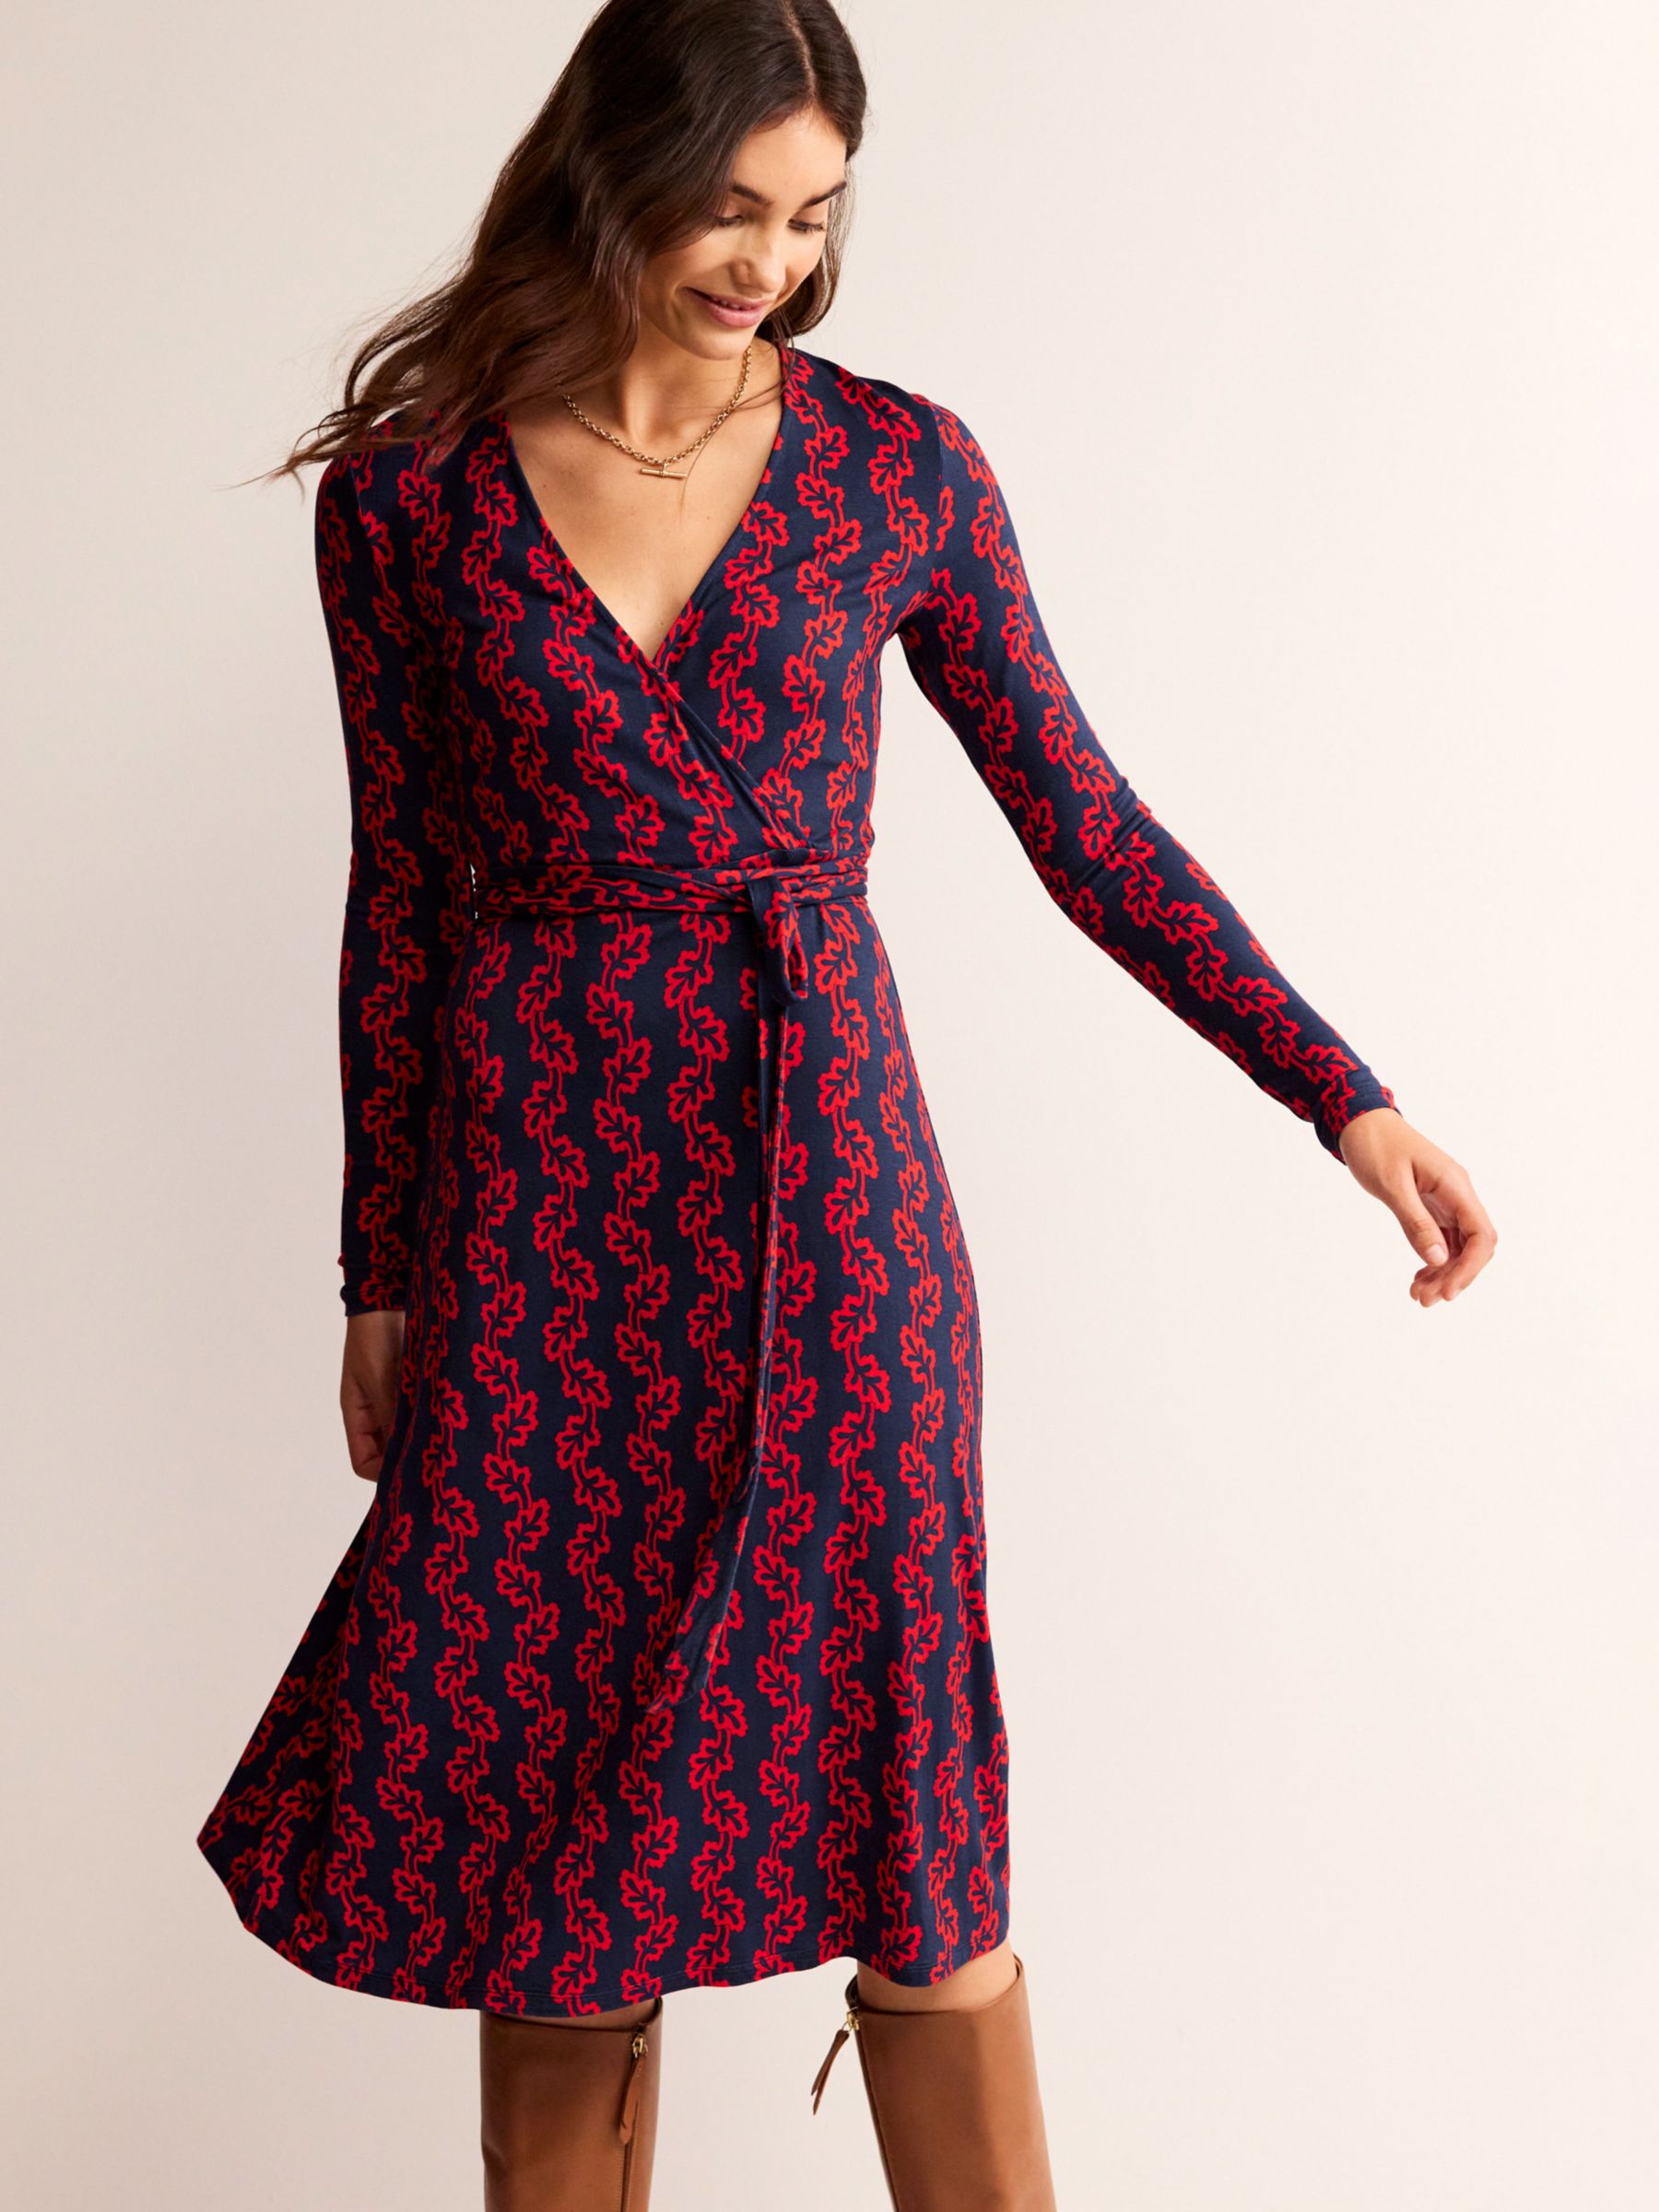 The Boden Pineapple Midi Dress - What Lizzy Loves